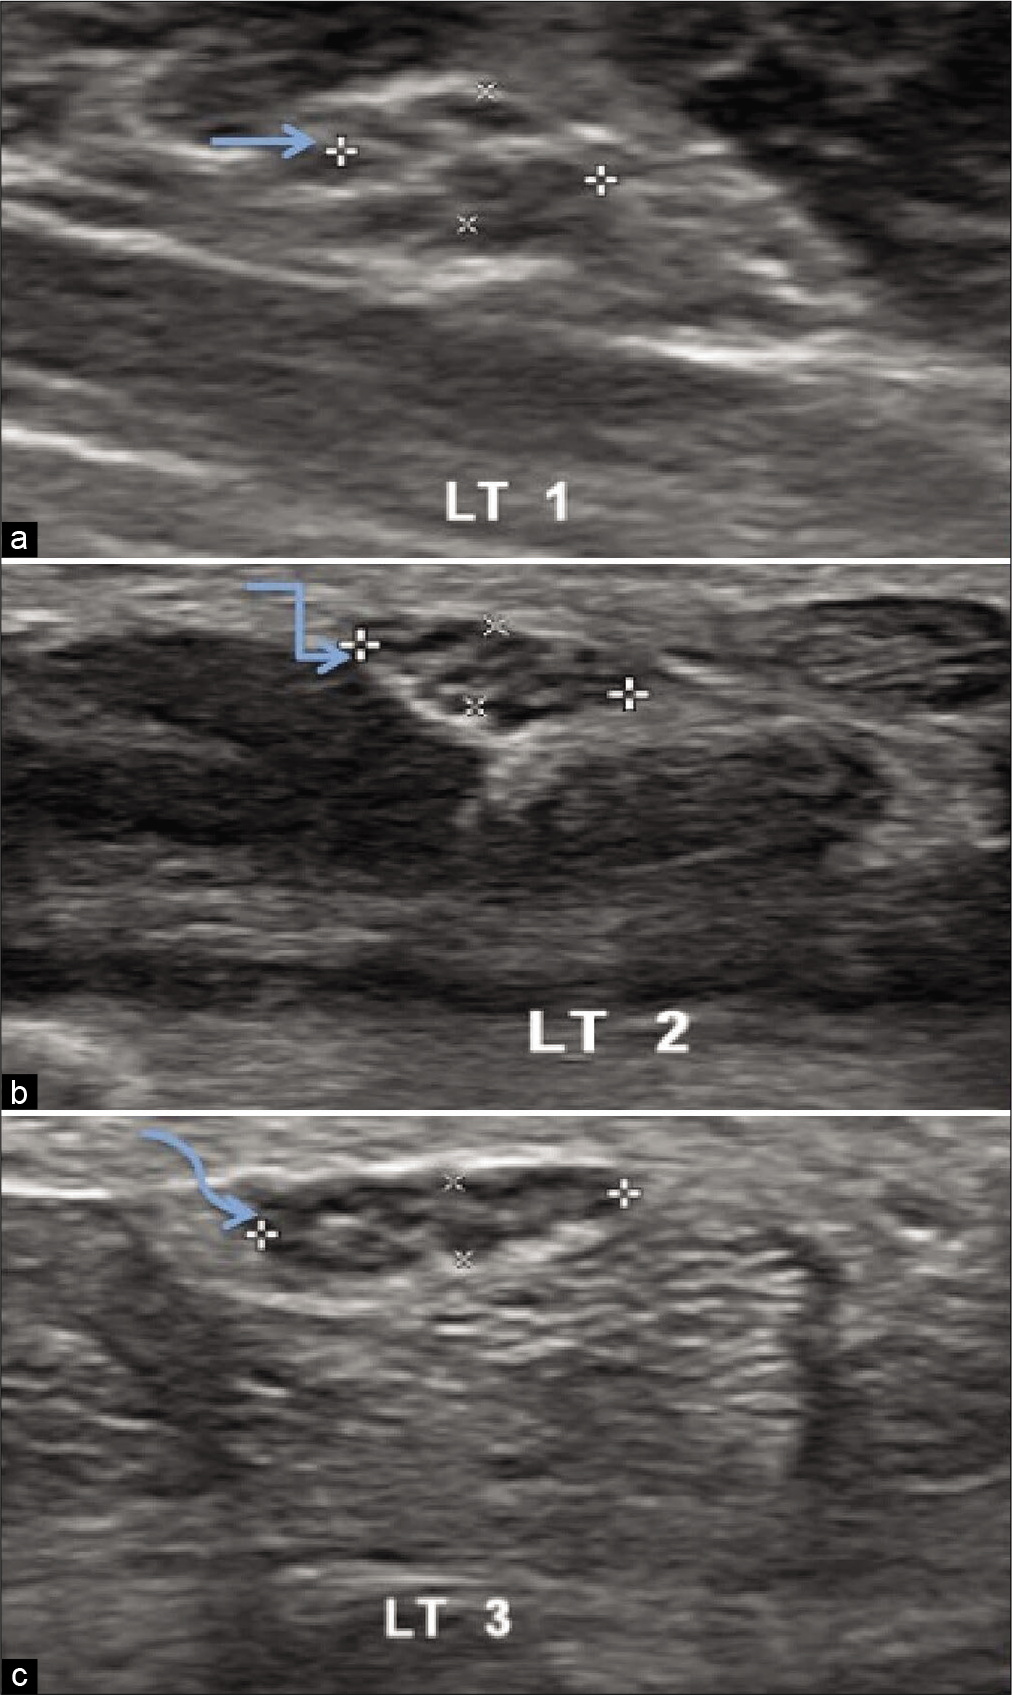 Ultrasonography of the left median nerve of healthy volunteer showing thickness /width ratio at three levels in distal forearm (a) thickness/width ratio 2.59 at the level of pronator quadratus,(straight arrow) (b) thickness/width ratio 3.03 proximal to carpal tunnel inlet, (bent arrow) (c) thickness/width ratio 2.89 distal to carpal tunnel outlet. (curved arrow).